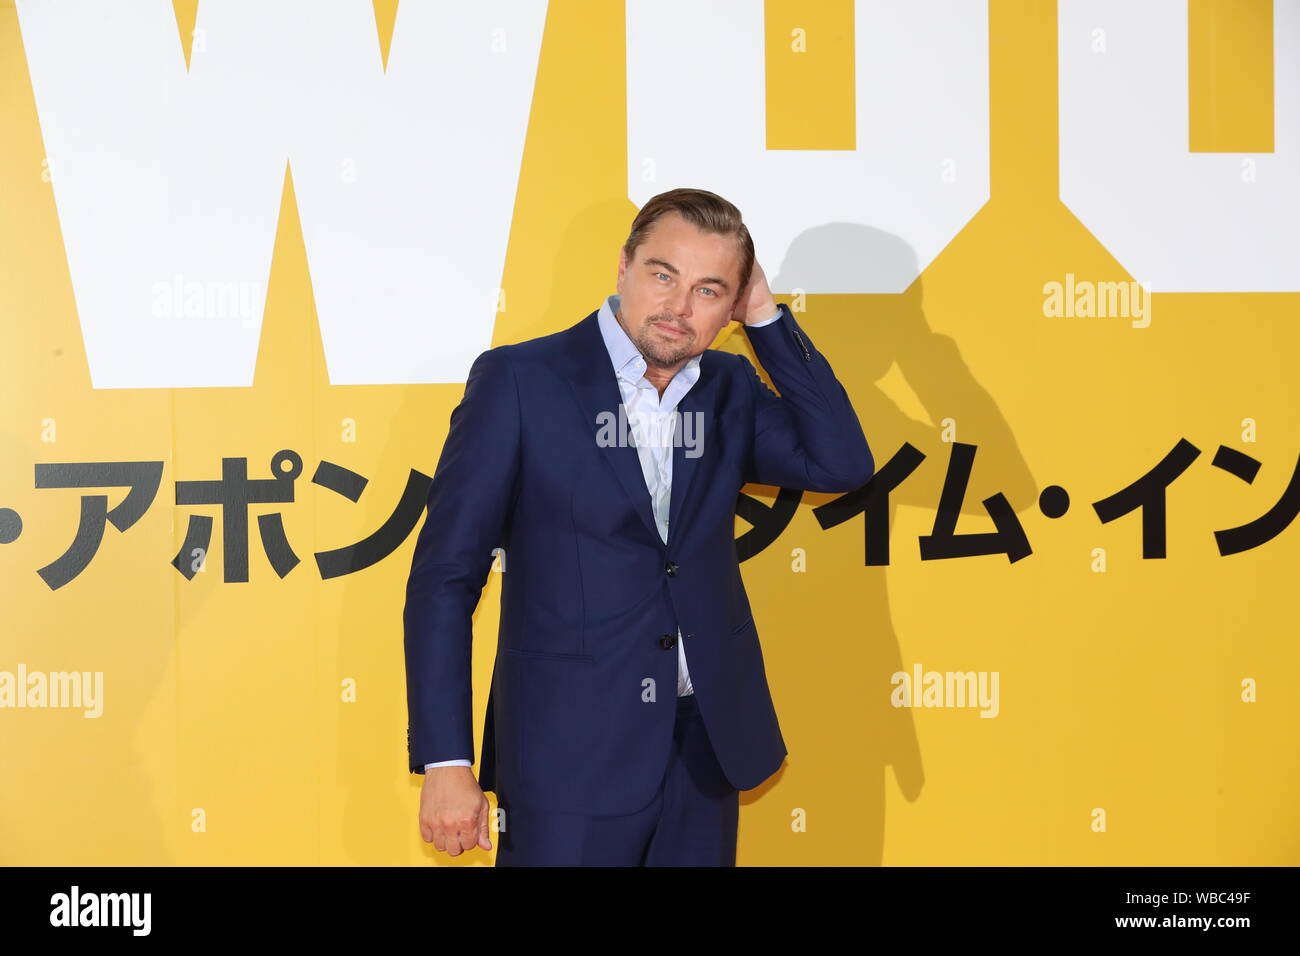 Tokyo, Japan. 26th Aug 2019. Actor Leonardo Dicaprio attends the Japan premiere for their movie 'Once Upon a Time in Hollywood' in Tokyo, Japan on August 26, 2019. The film will be released in Japan on August 30. Stock Photo